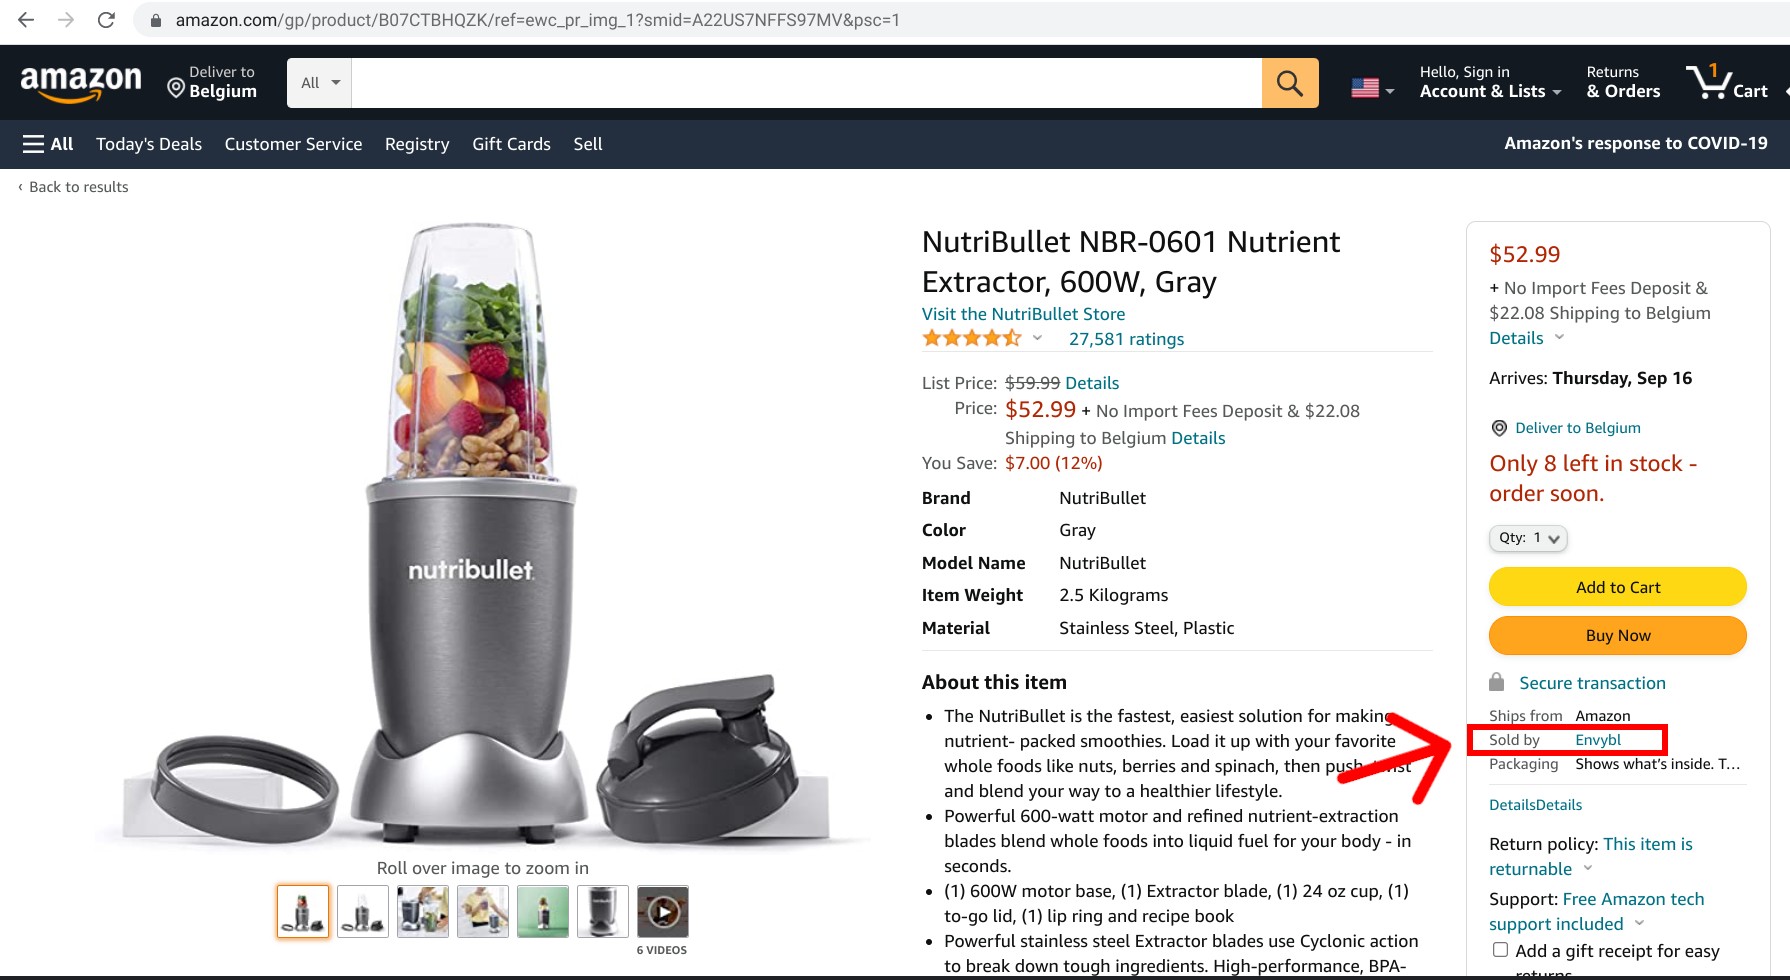 Screenshot of a third party seller listing on Amazon.com